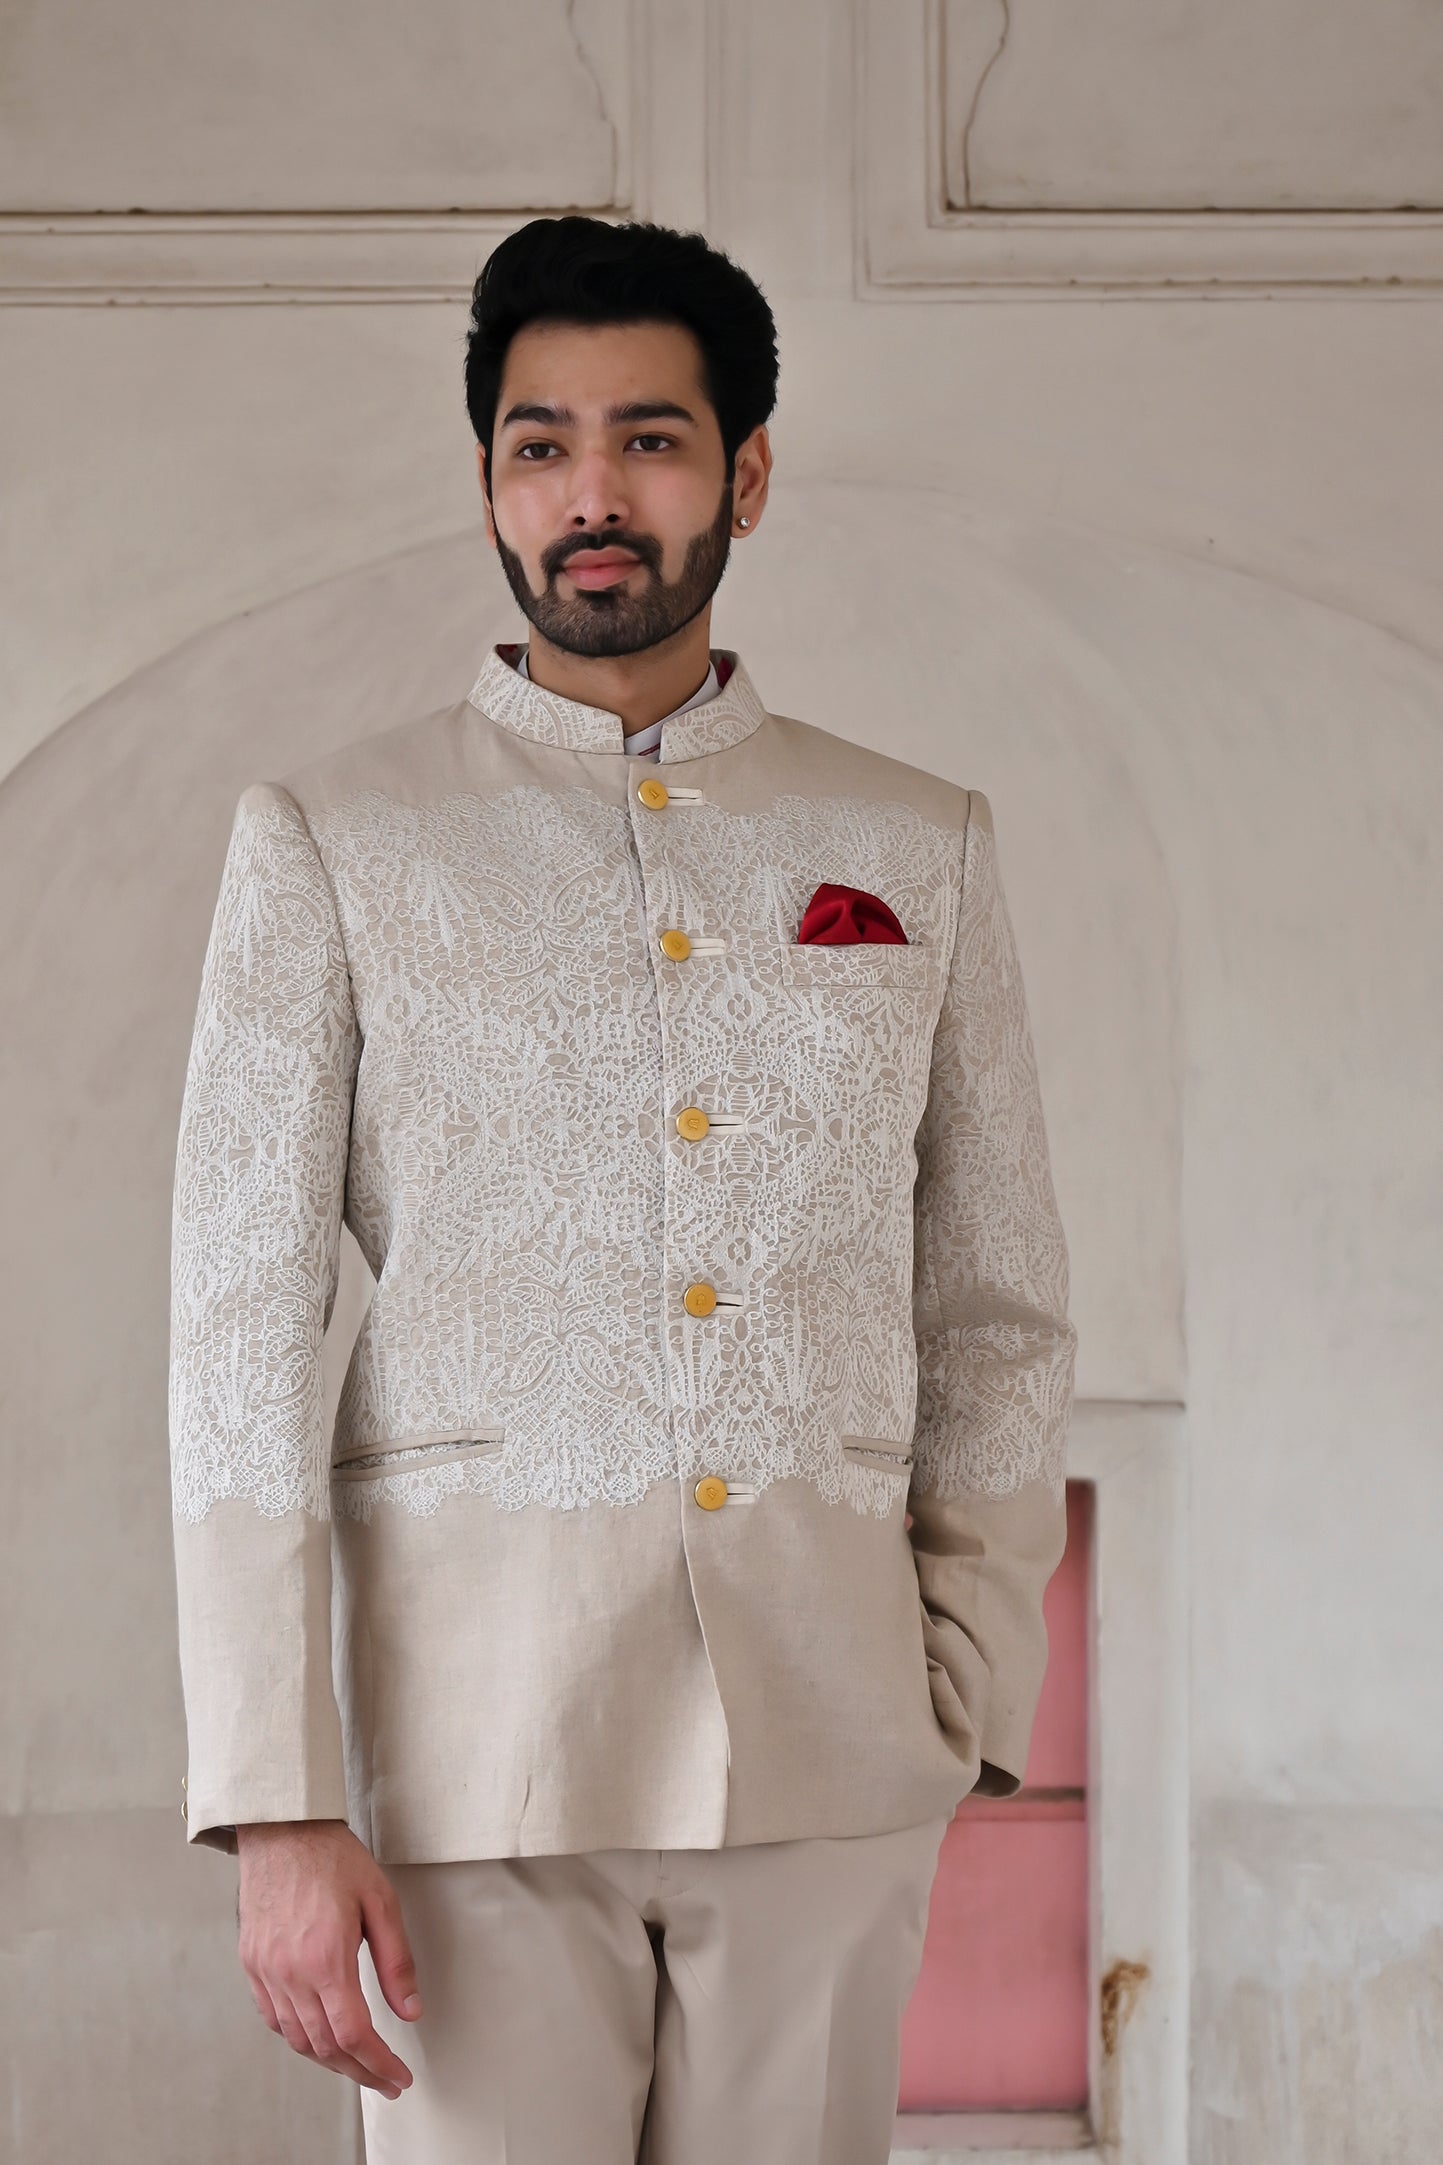 Discover more than 162 cream bandhgala suit super hot